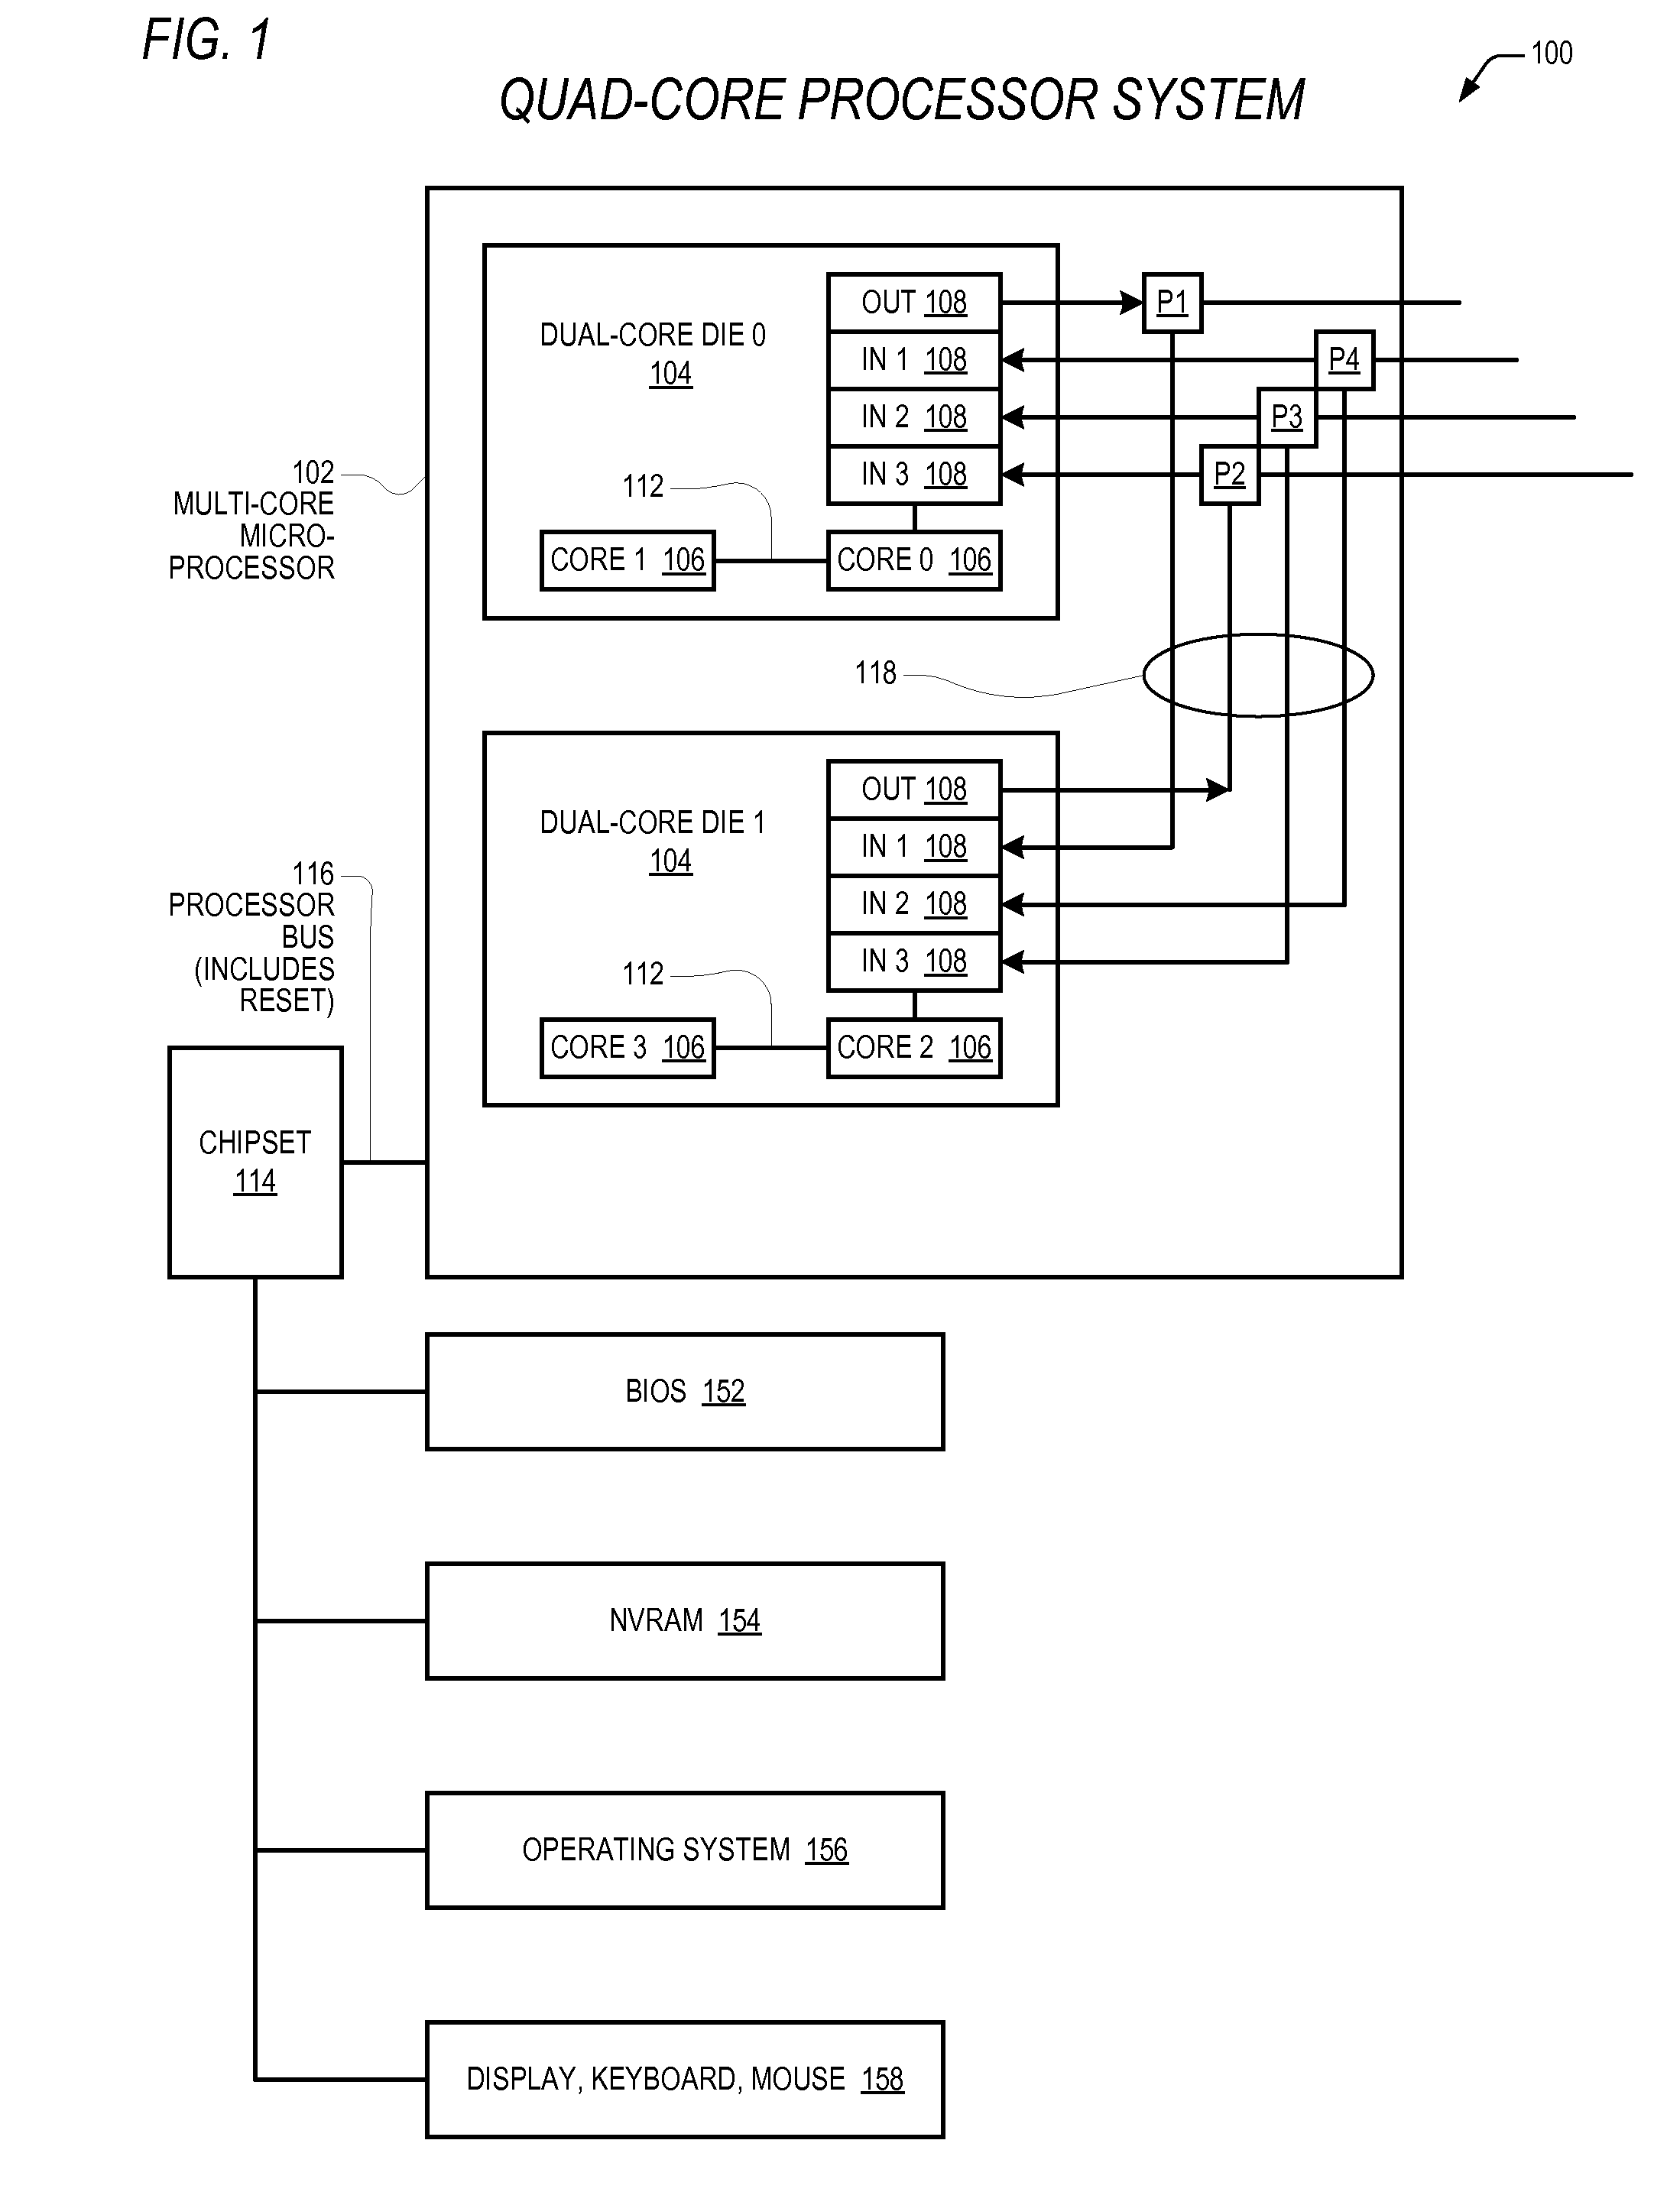 Dynamic and selective core disablement and reconfiguration in a multi-core processor